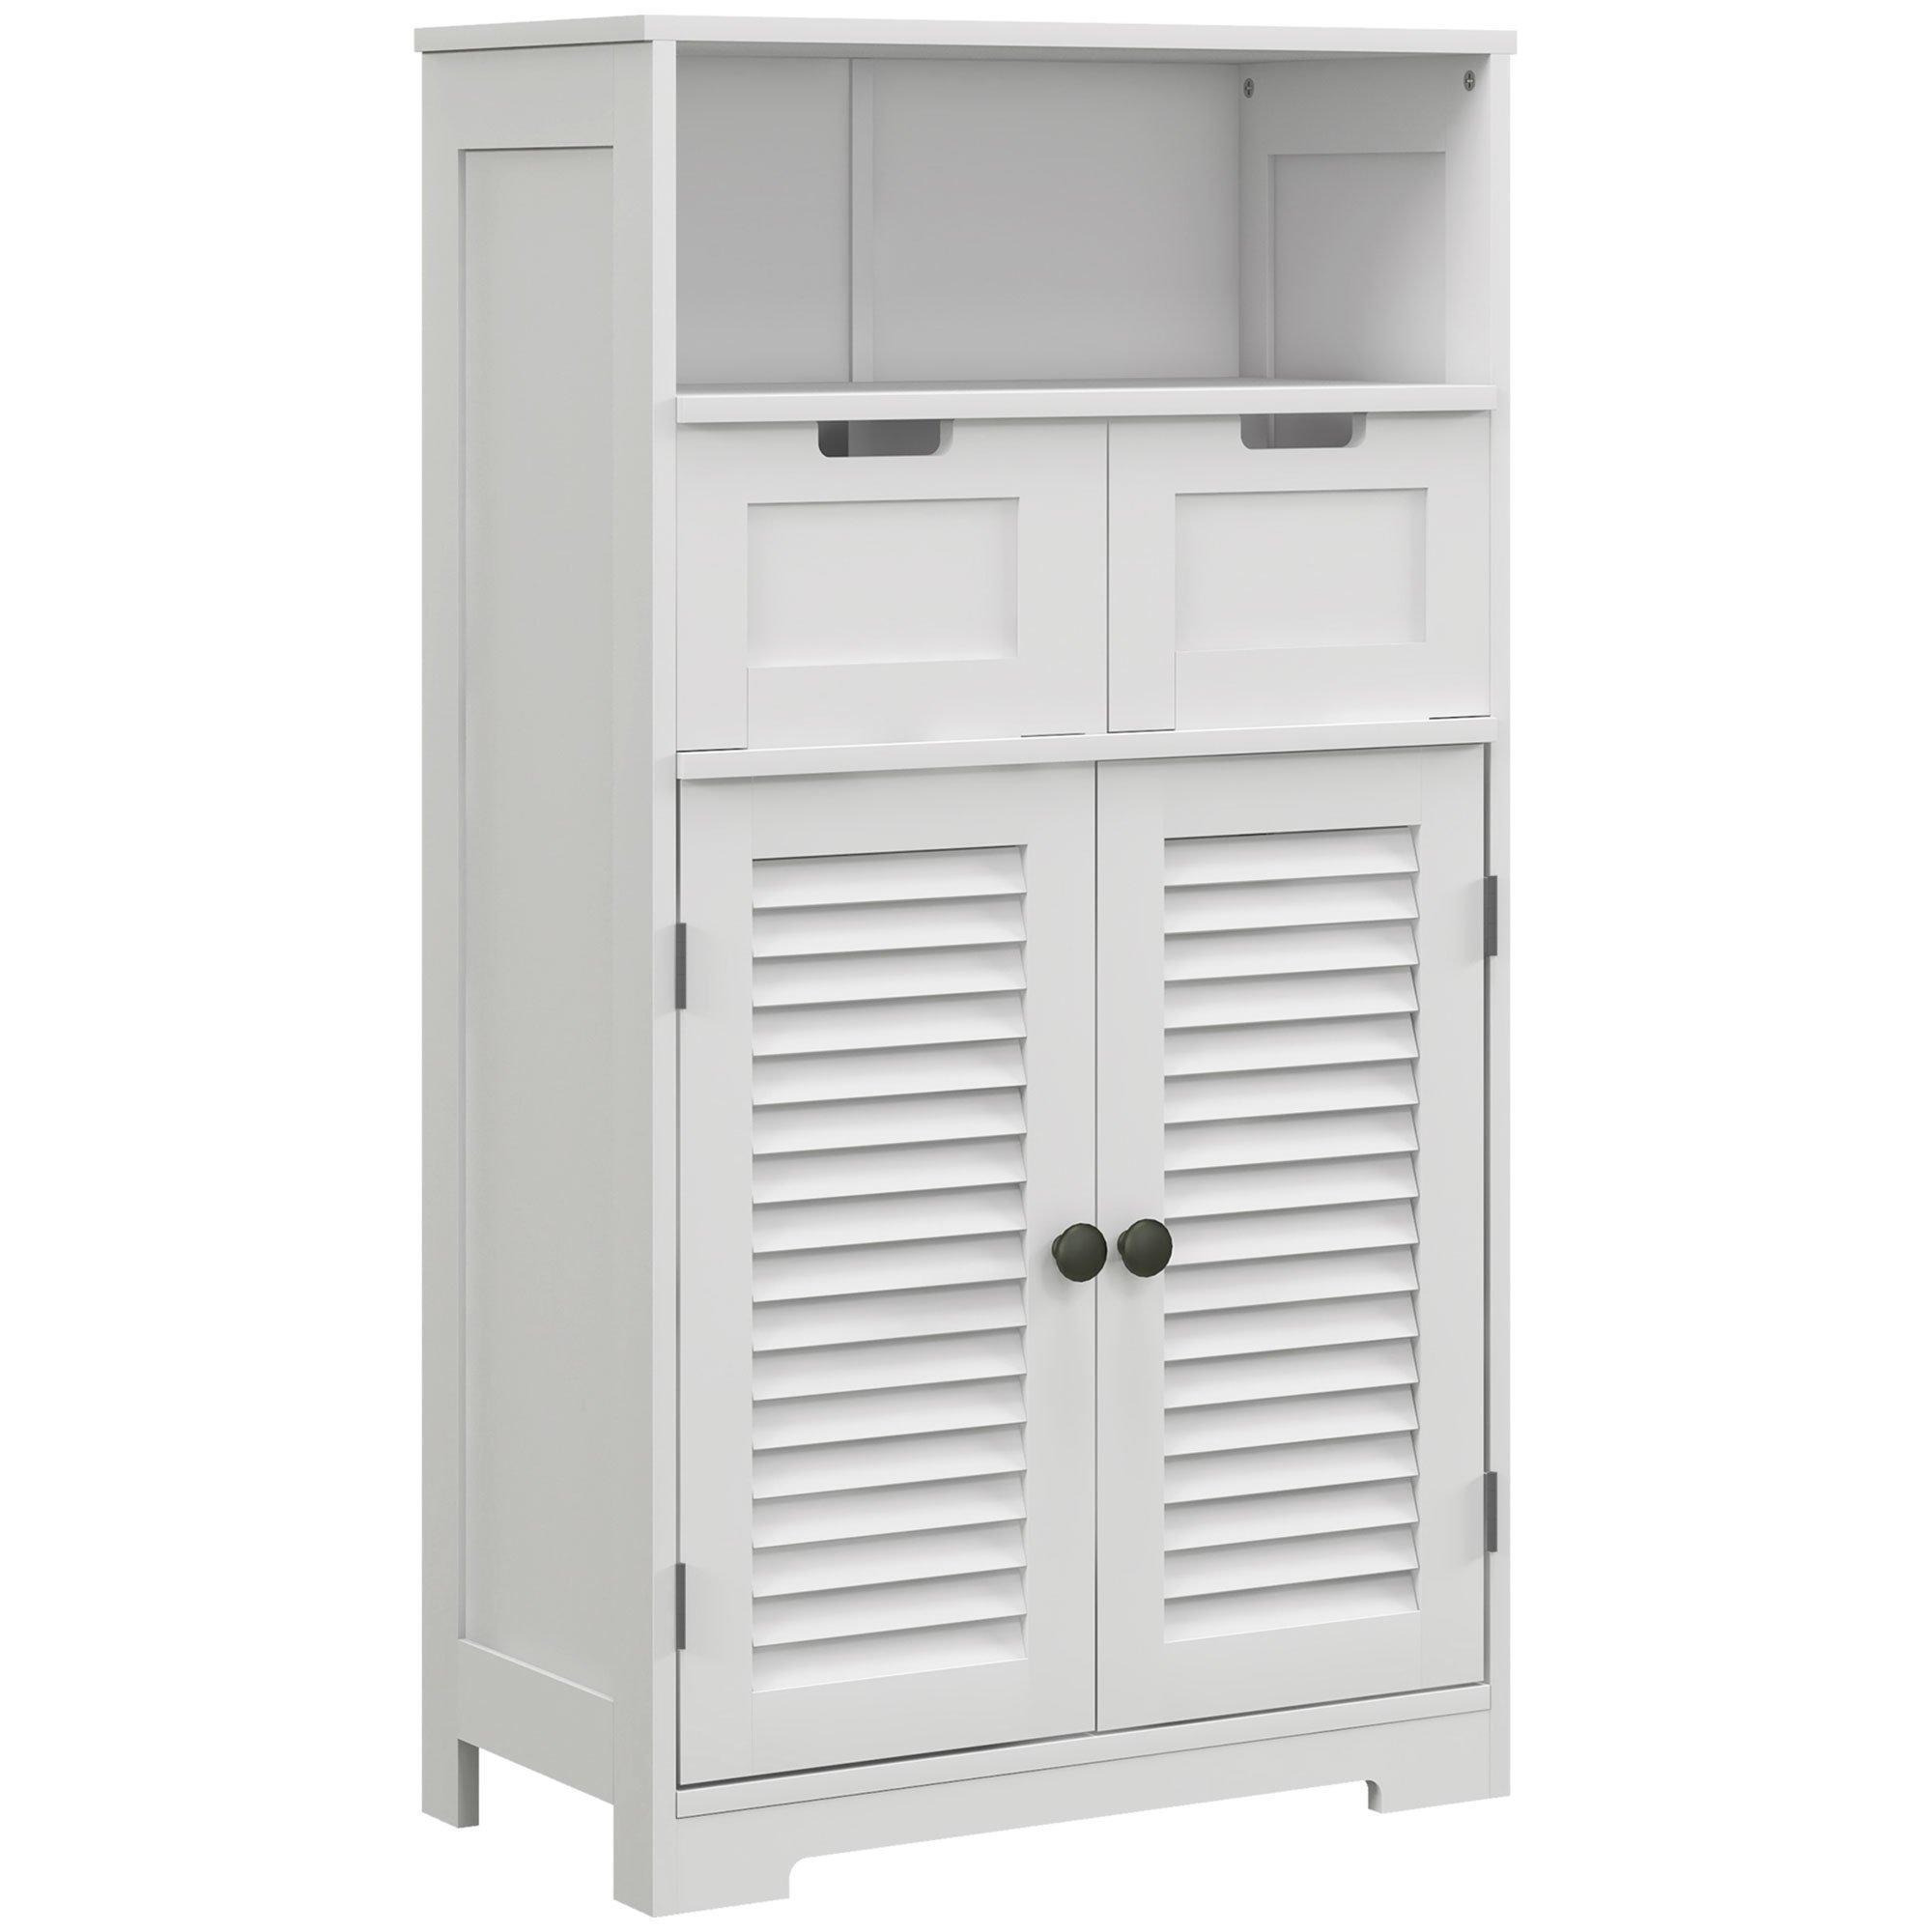 Free Standing Bathroom Storage Cabinet with Louvred Doors 2 Drawers - image 1